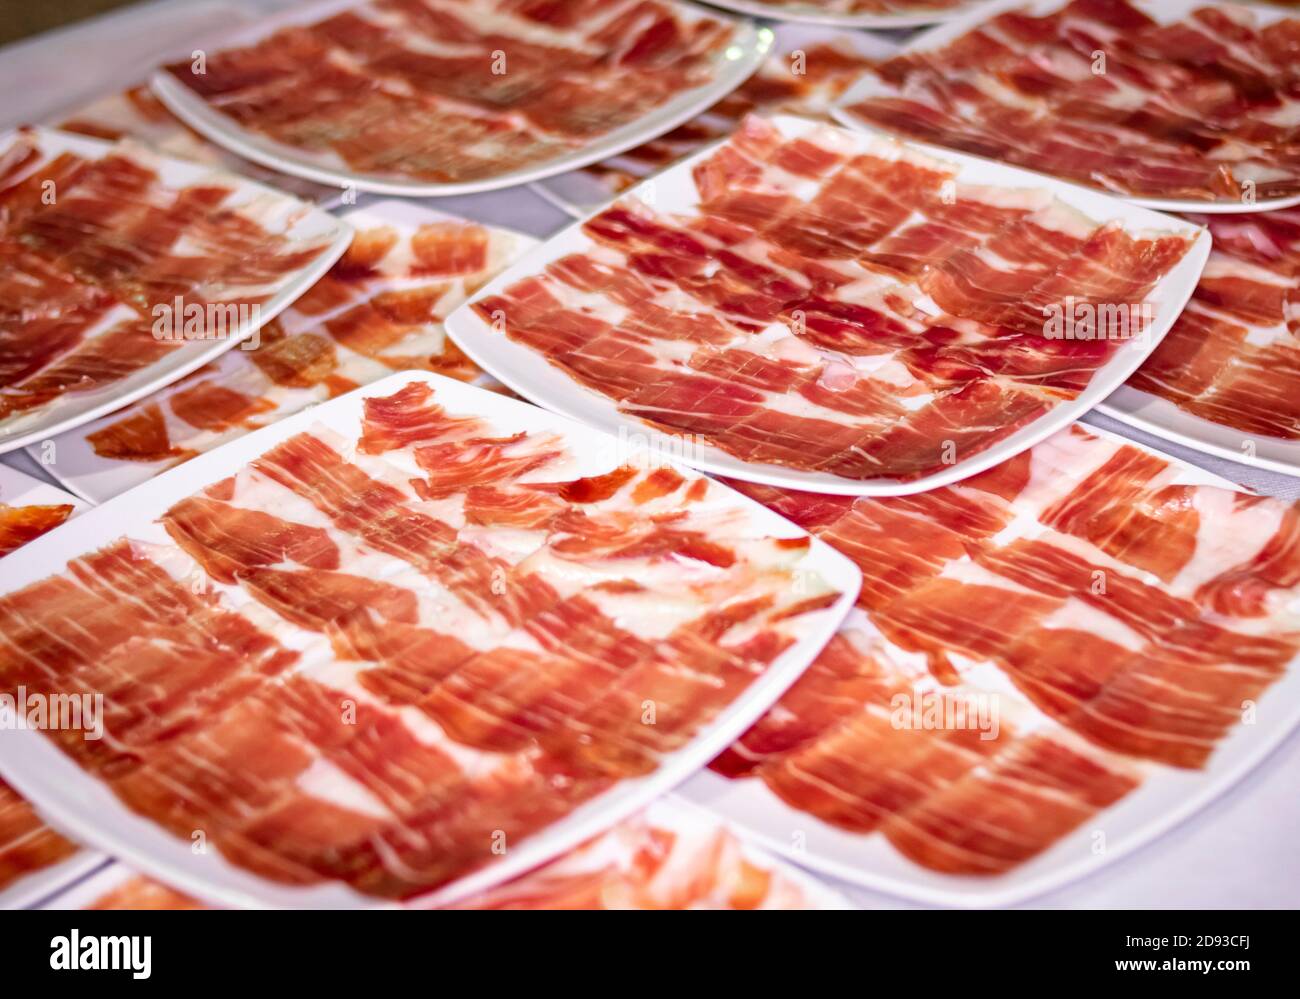 Catering service. Dishes and portions of Iberian ham and Serrano ham at a social event Stock Photo